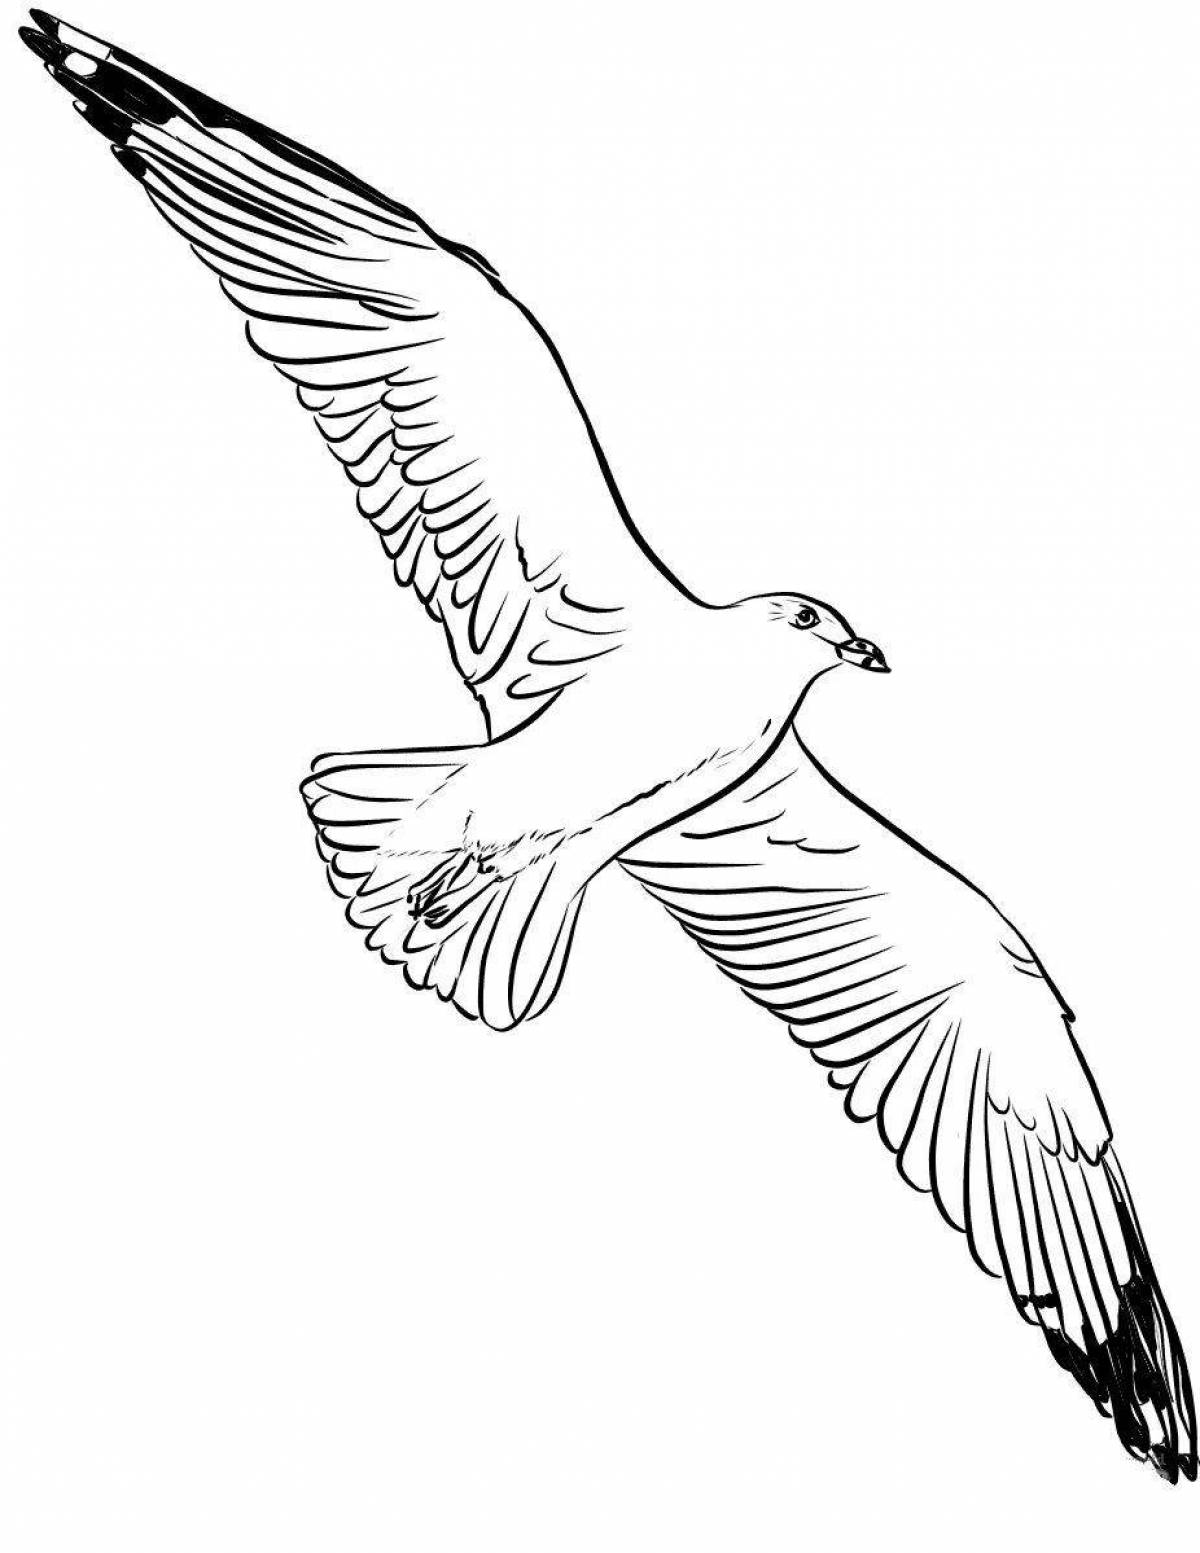 Albatross beckoning coloring page